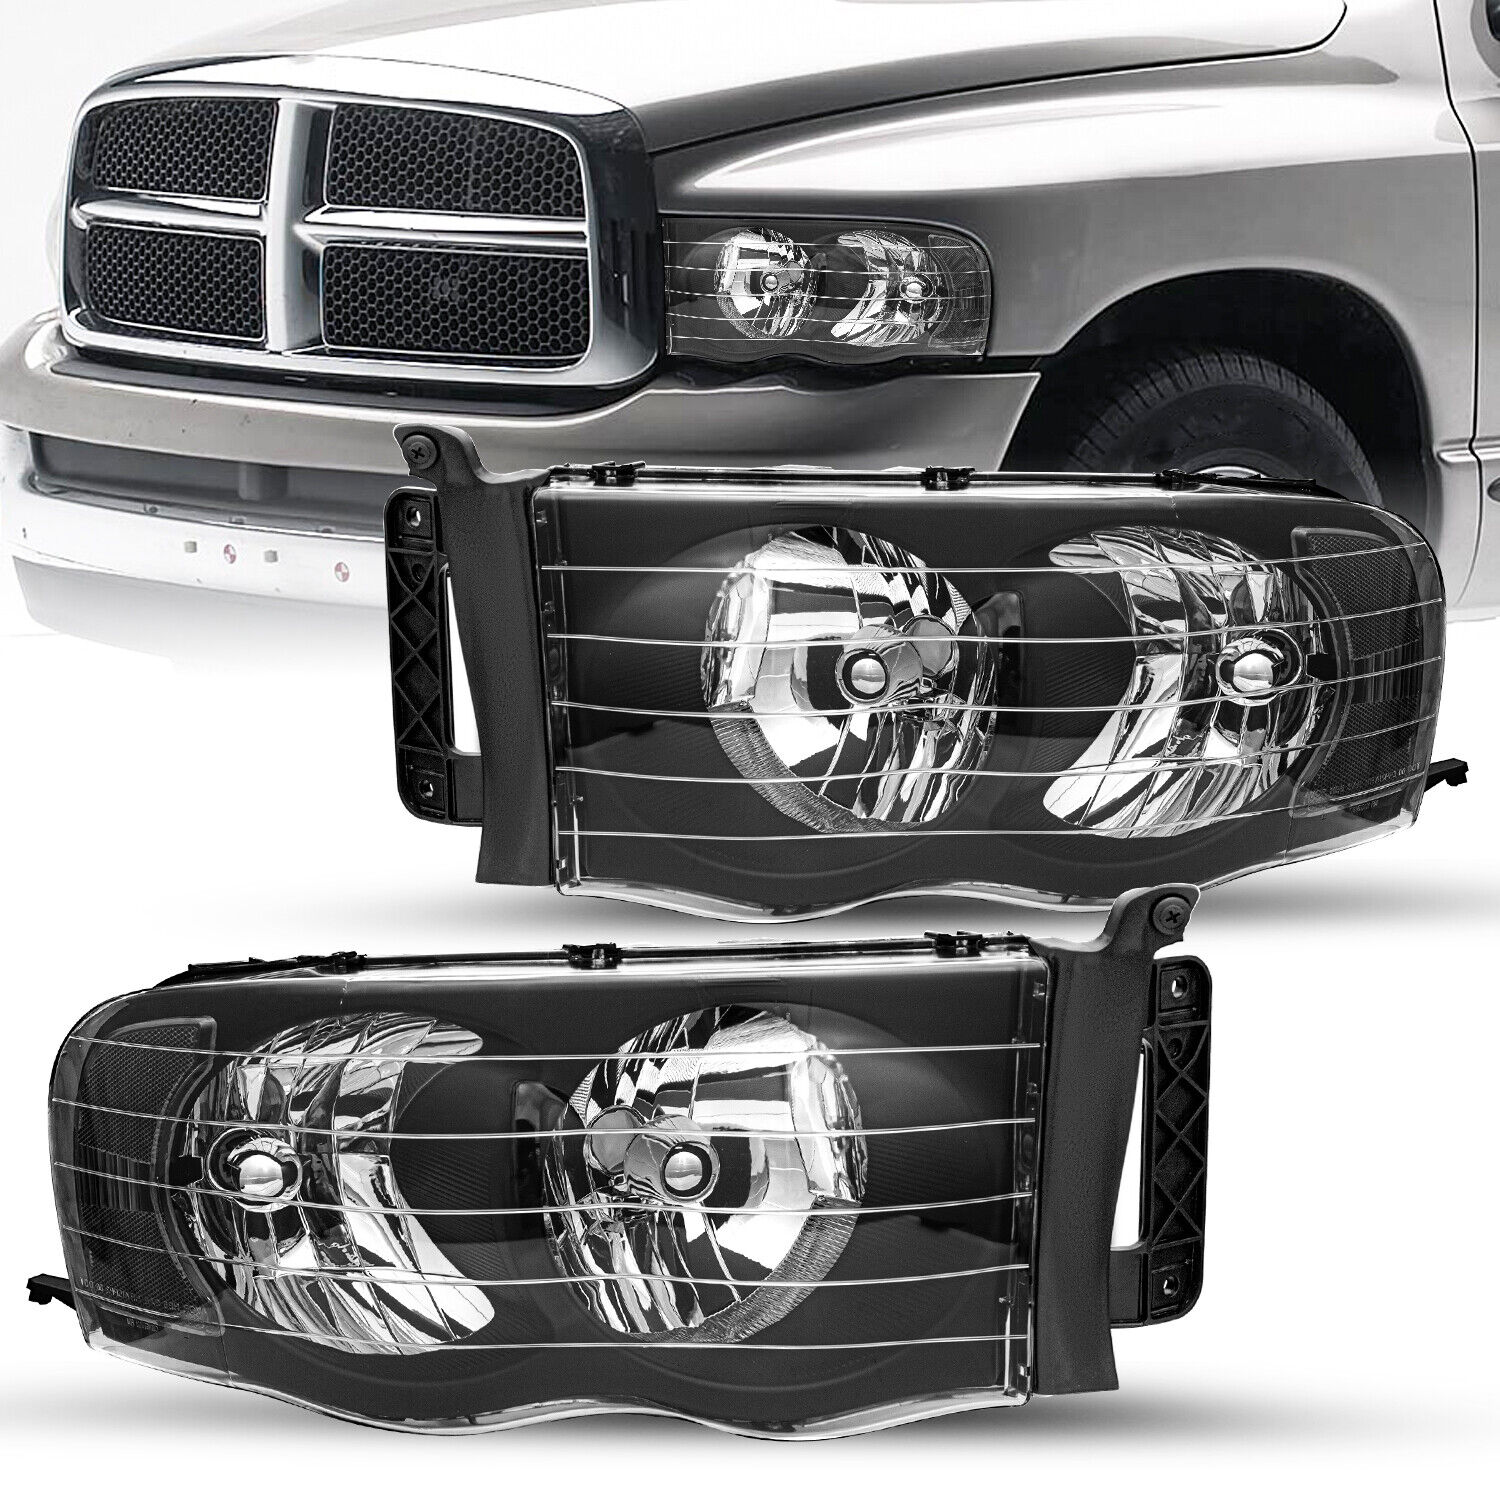 For 2002-2005 Dodge Ram Pickup Headlights Assembly Black Clear Headlamps LH&RH